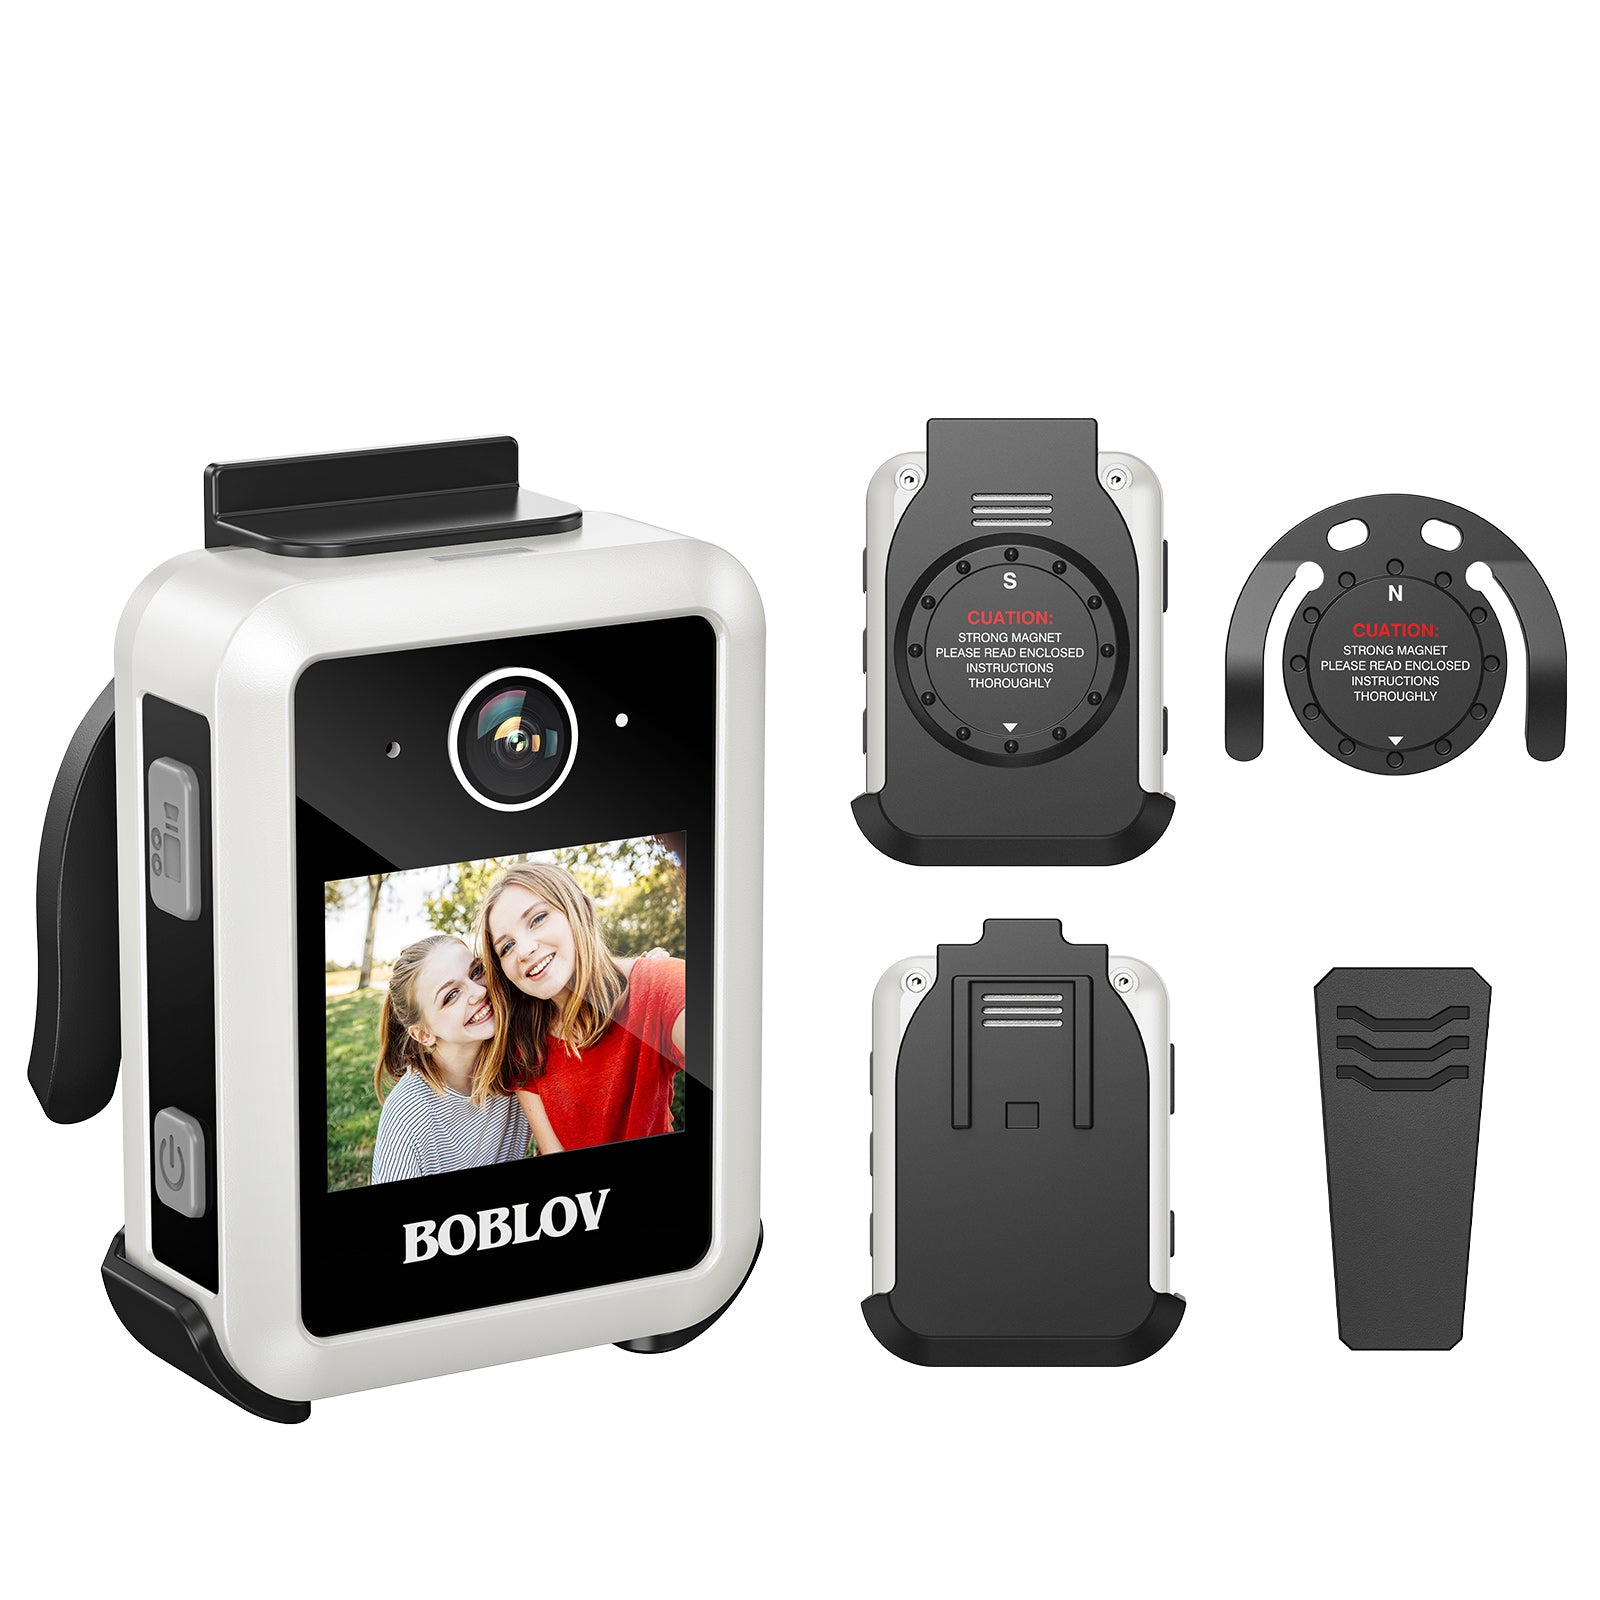 BOBLOV X2 Body Camera with 1440P resolution and LCD Display0